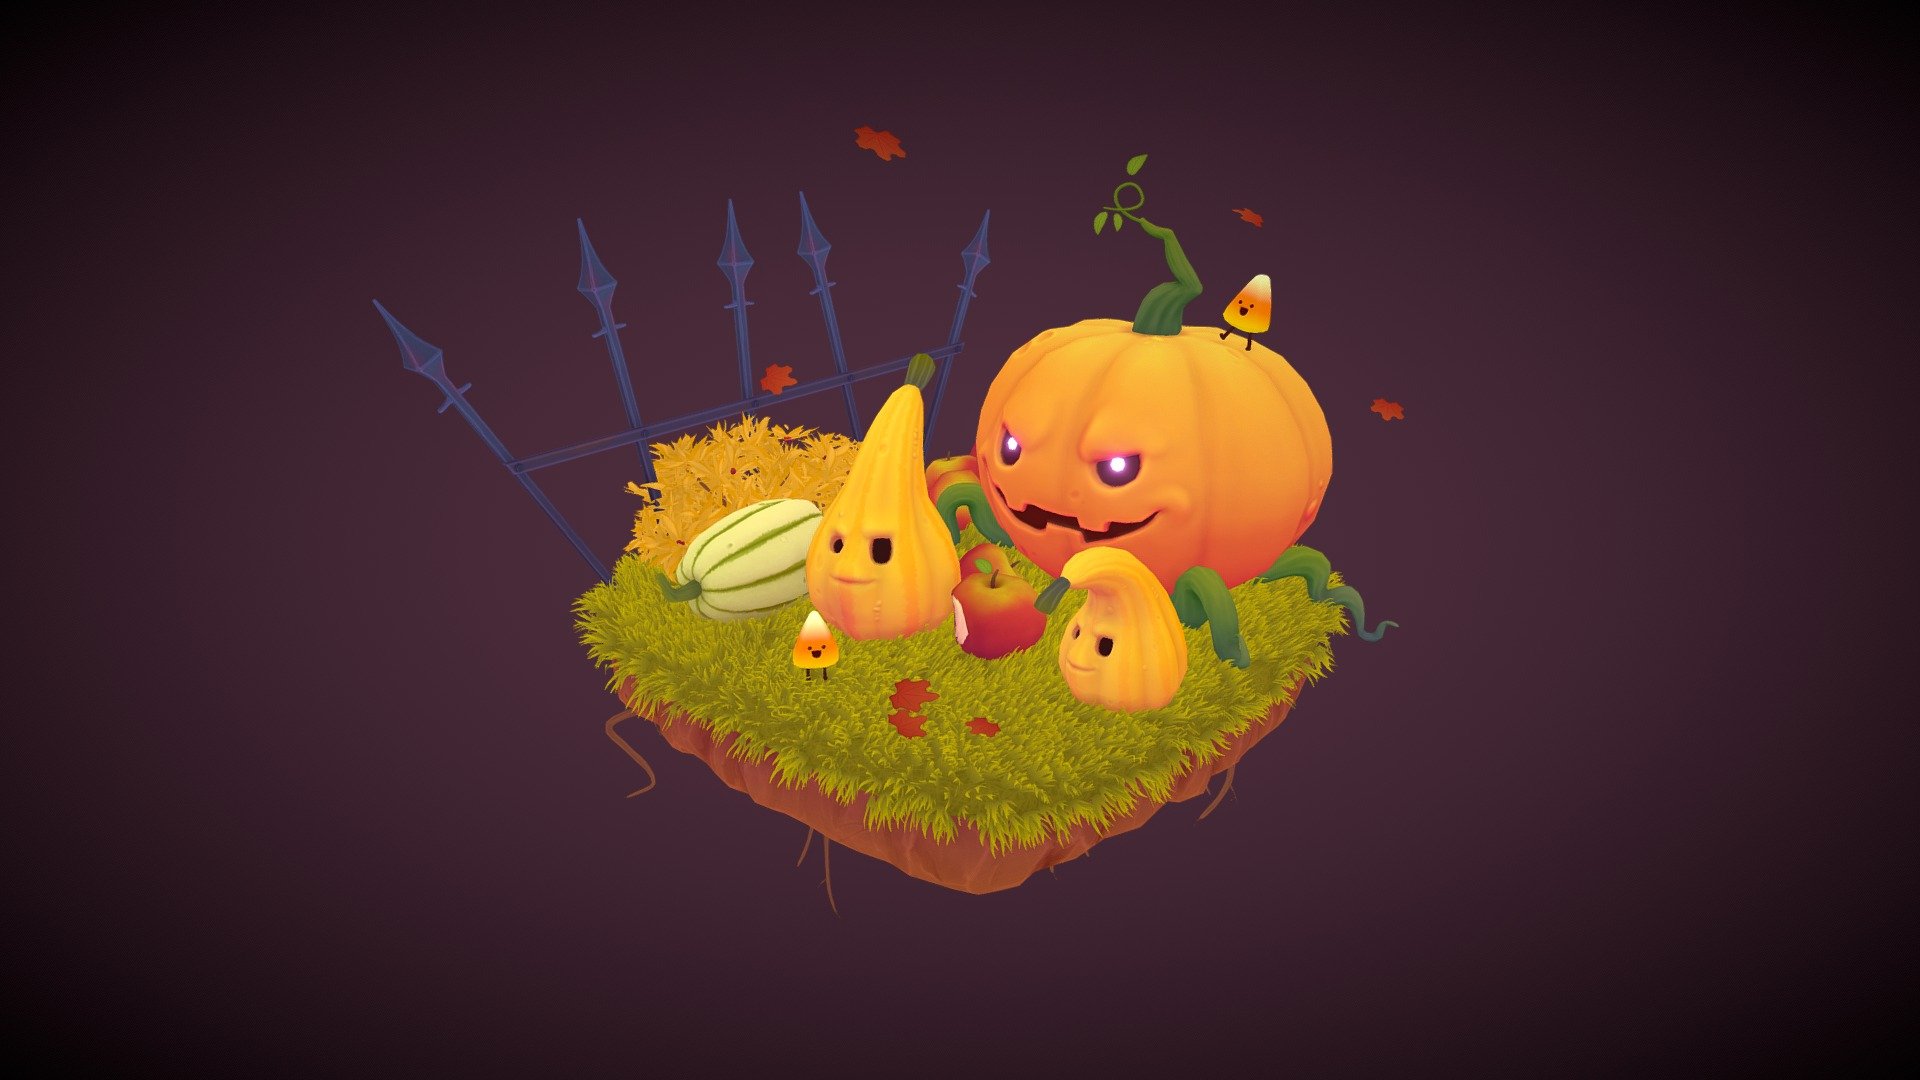 TIS SPOOKY SEASON

I partnered up for a second time with my collegue Roxanne Chartrand. She created an amazing spooky concept that I recreated in 3D. Please go check her awesome art!! 

That's pretty much why I gave up on #Creatober oops hahaha! 

I hope you'll like it!

 - Spooky Pumpkin Squash - 3D model by Agathe Préfontaine (@apref) 3d model